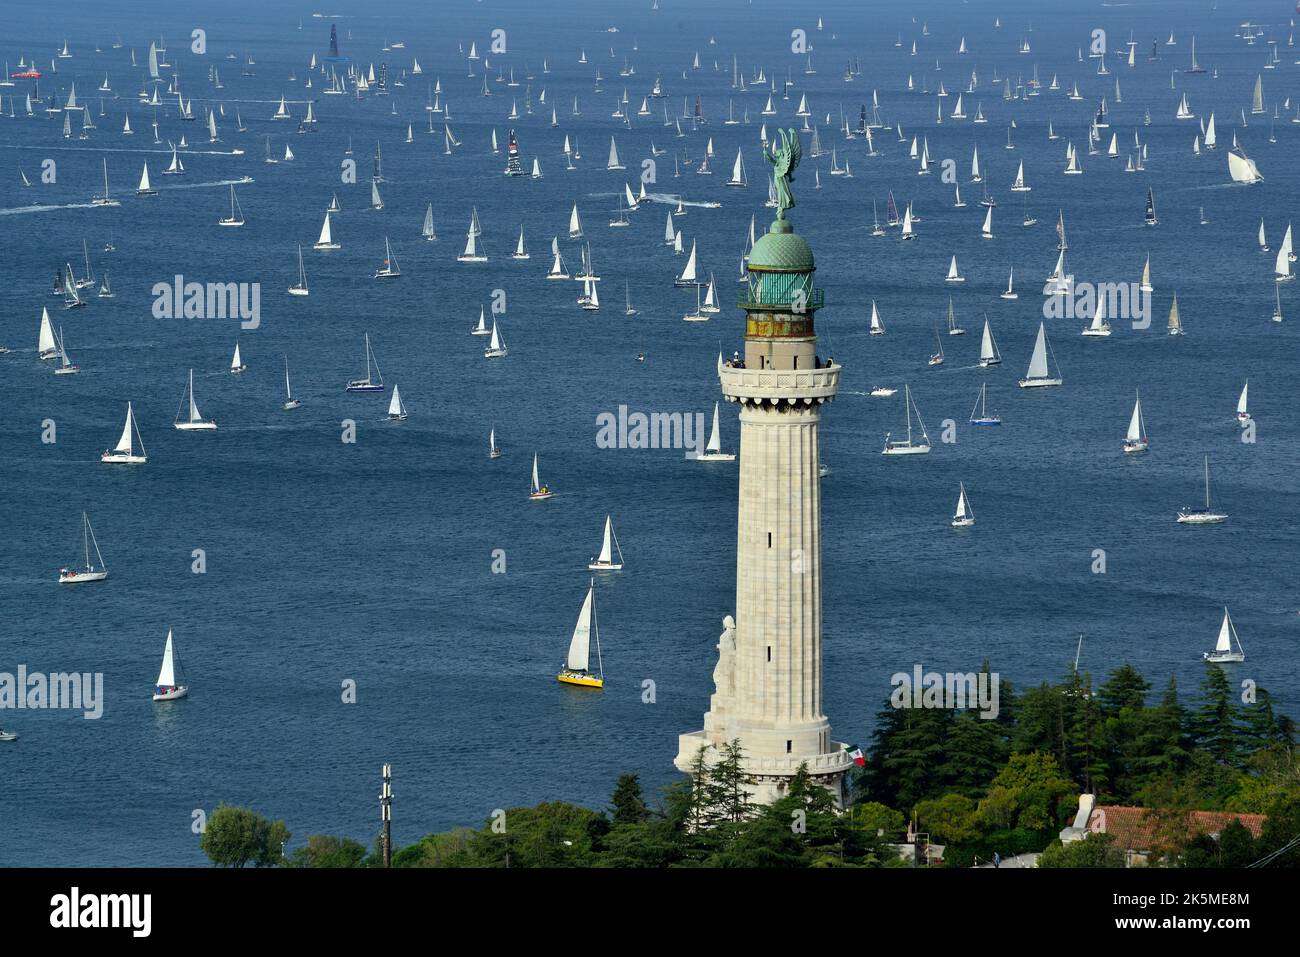 Trieste, Italy. October 9th, 2022. Barcolana number 54. 1614 sailboats at the start of the largest regatta in the world. The American Deep Blue, 26 meters and 25 tons,with Wendy Schmidt at the helm, triumphs. The first Barcolana won by a woman. Stock Photo